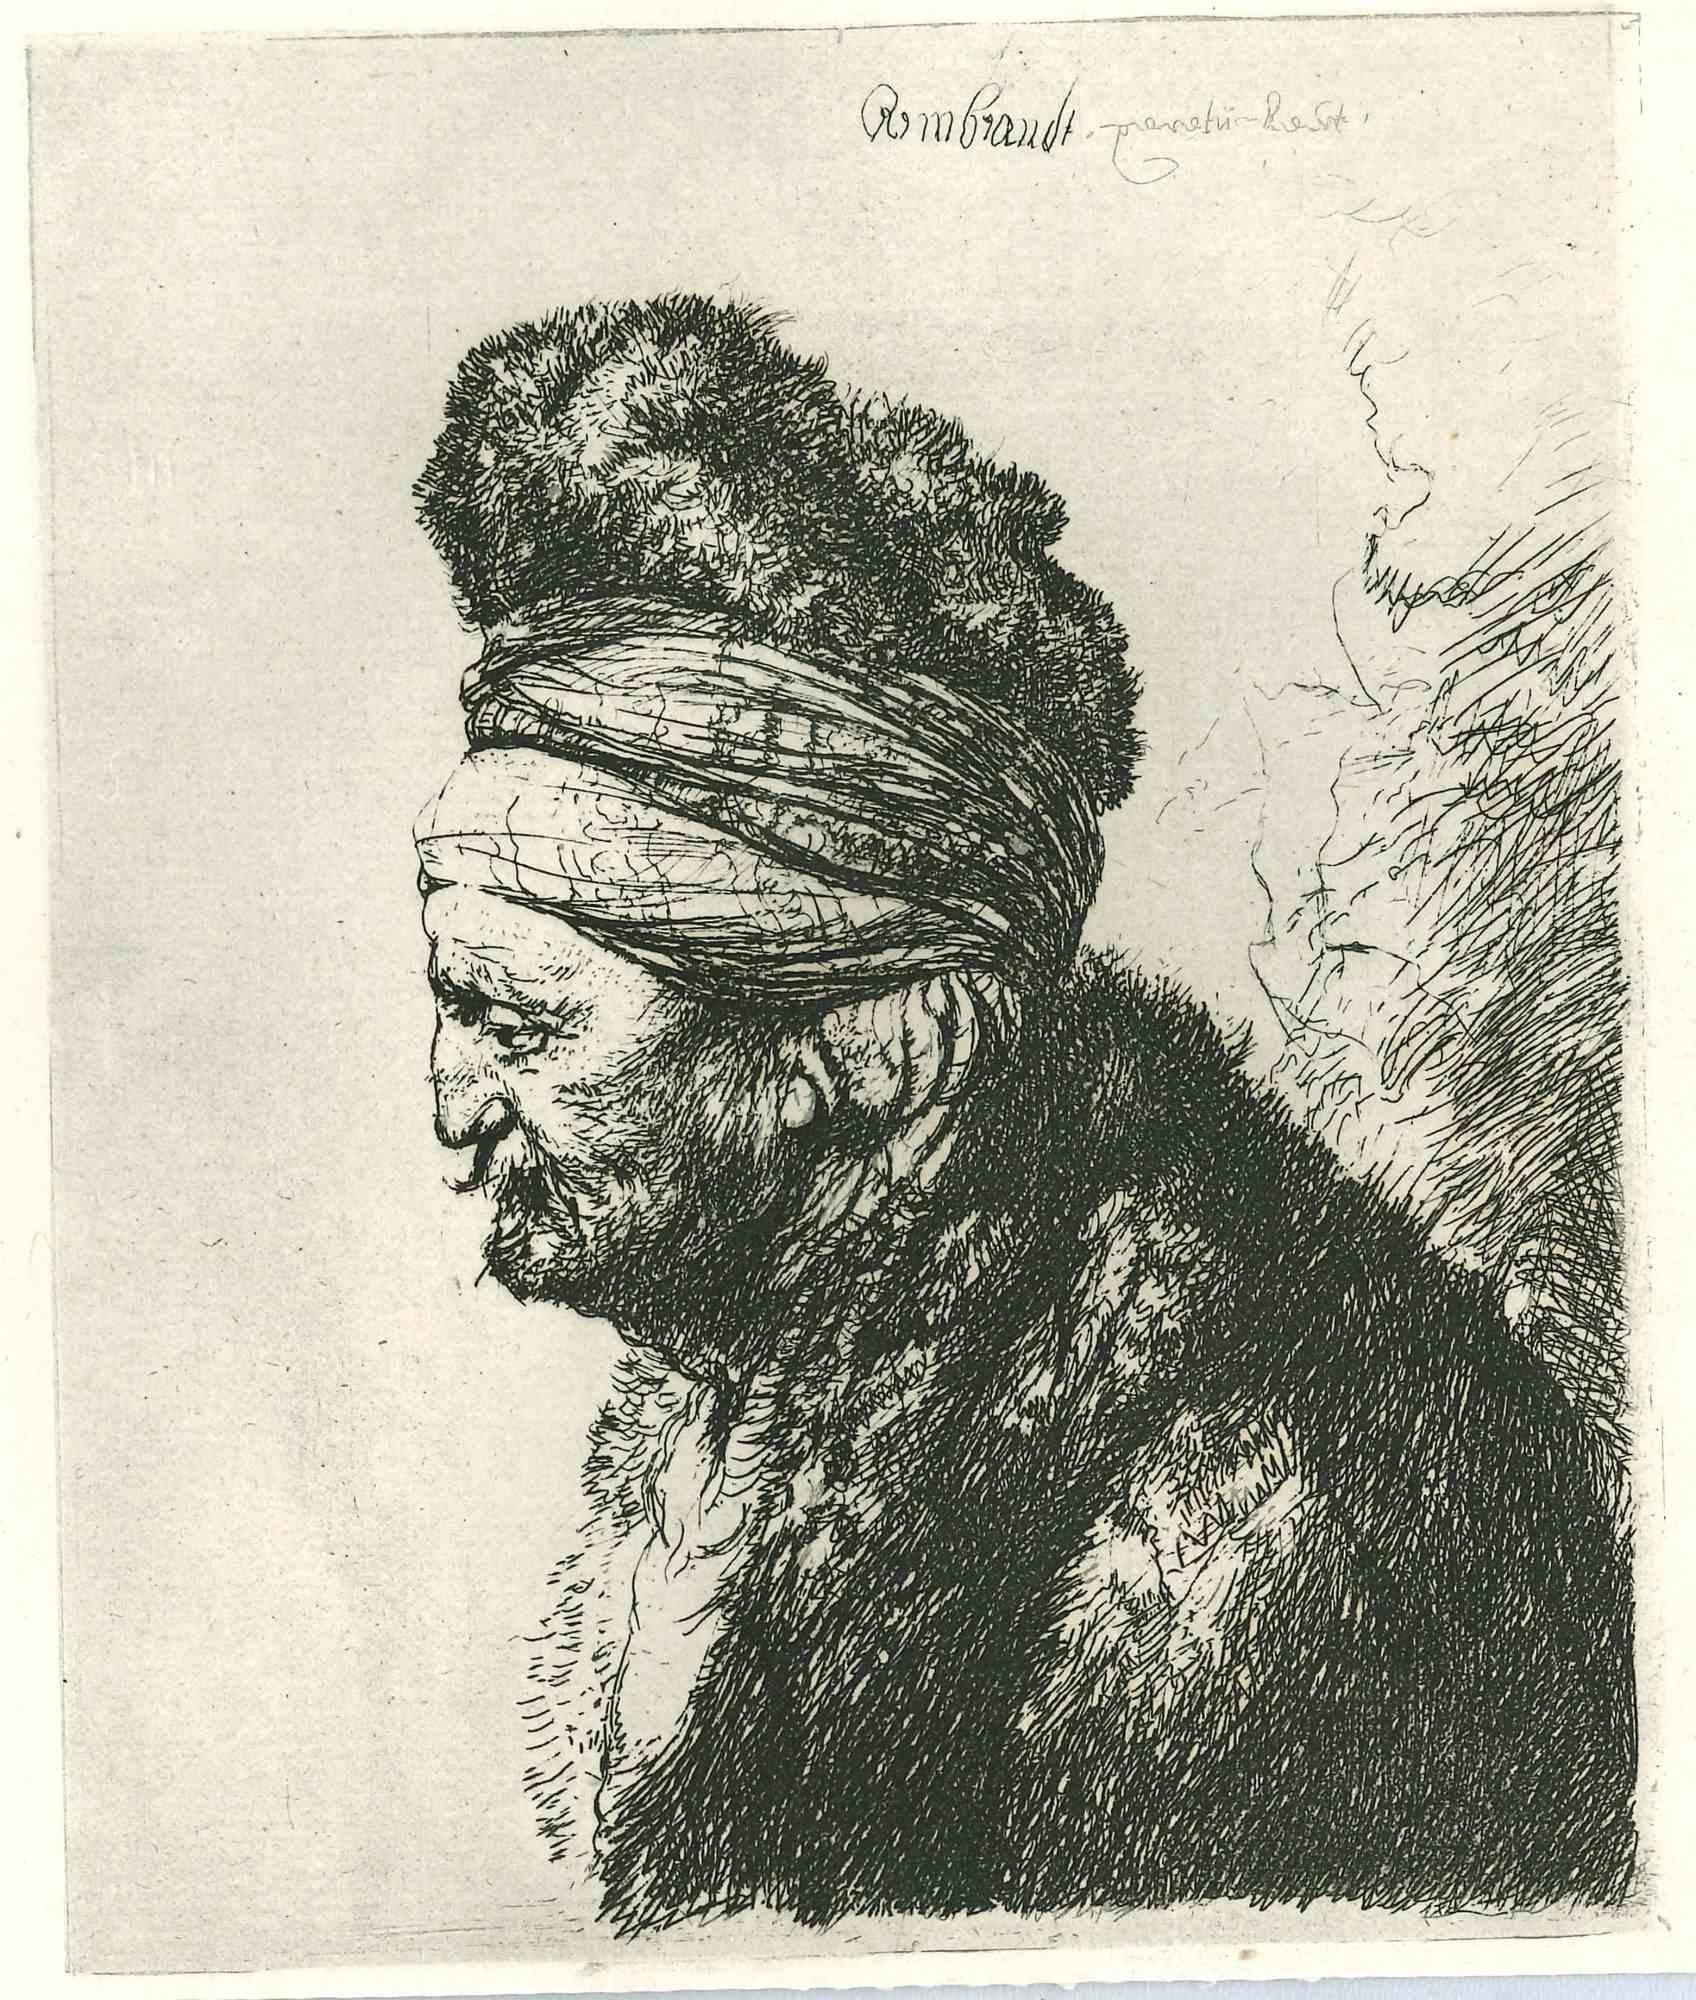 Charles Amand Durand Portrait Print - Head of a Man with Turban - Engraving after Rembrandt - 19th Century